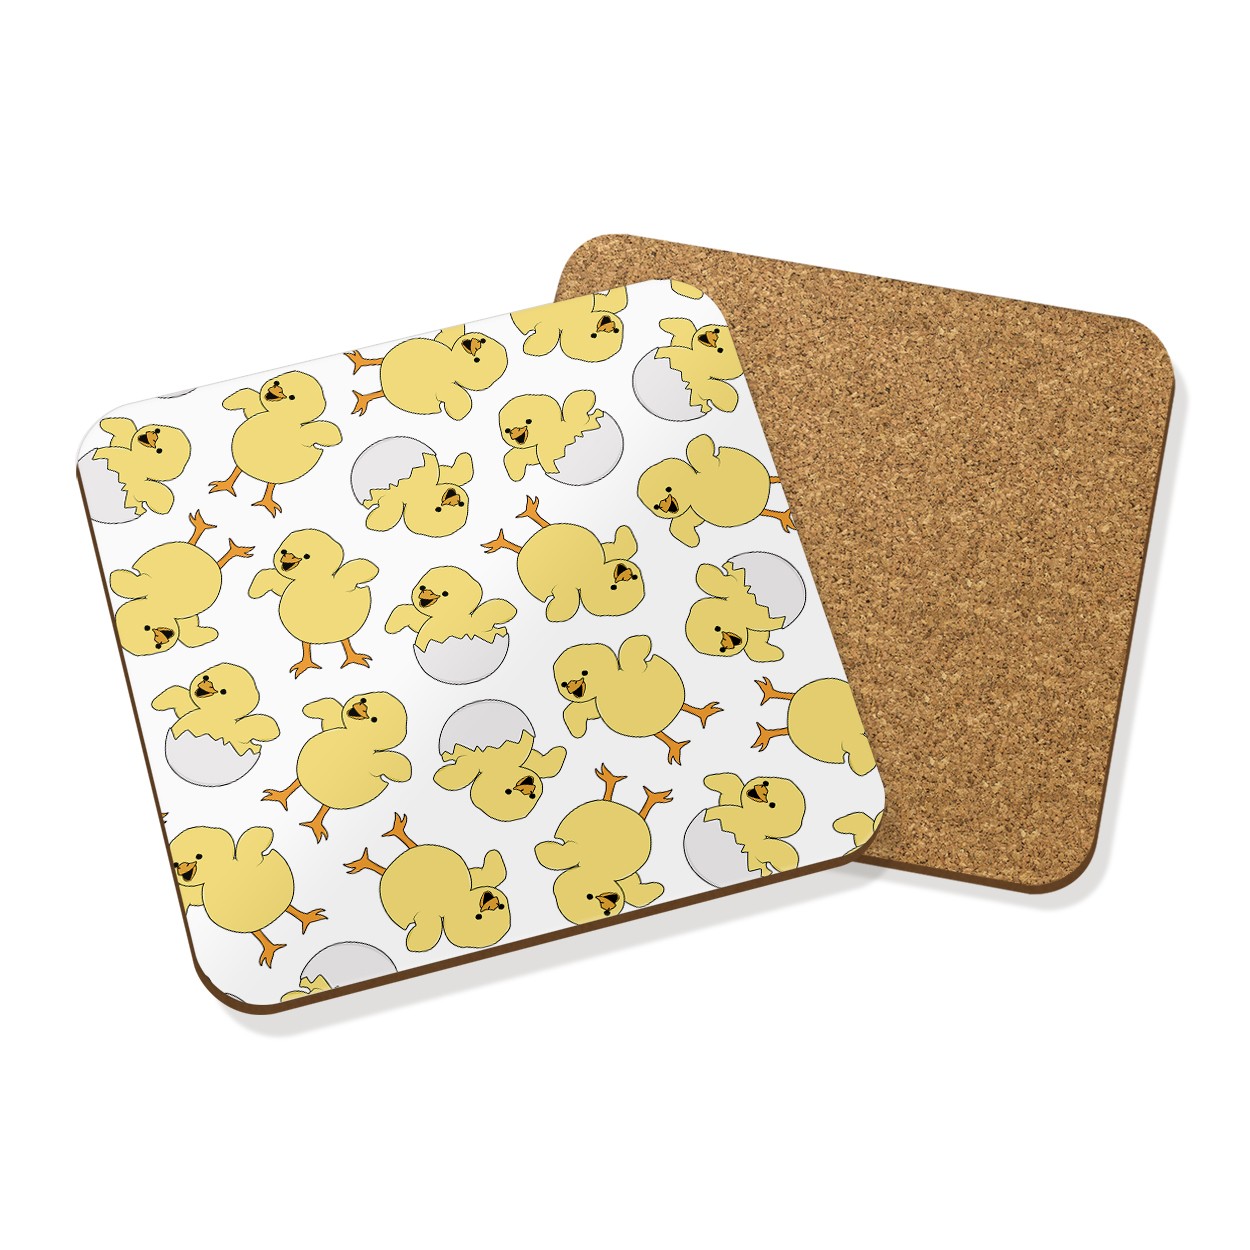 BABY CHICK DUCKLING DRINKS COASTER MAT CORK SQUARE